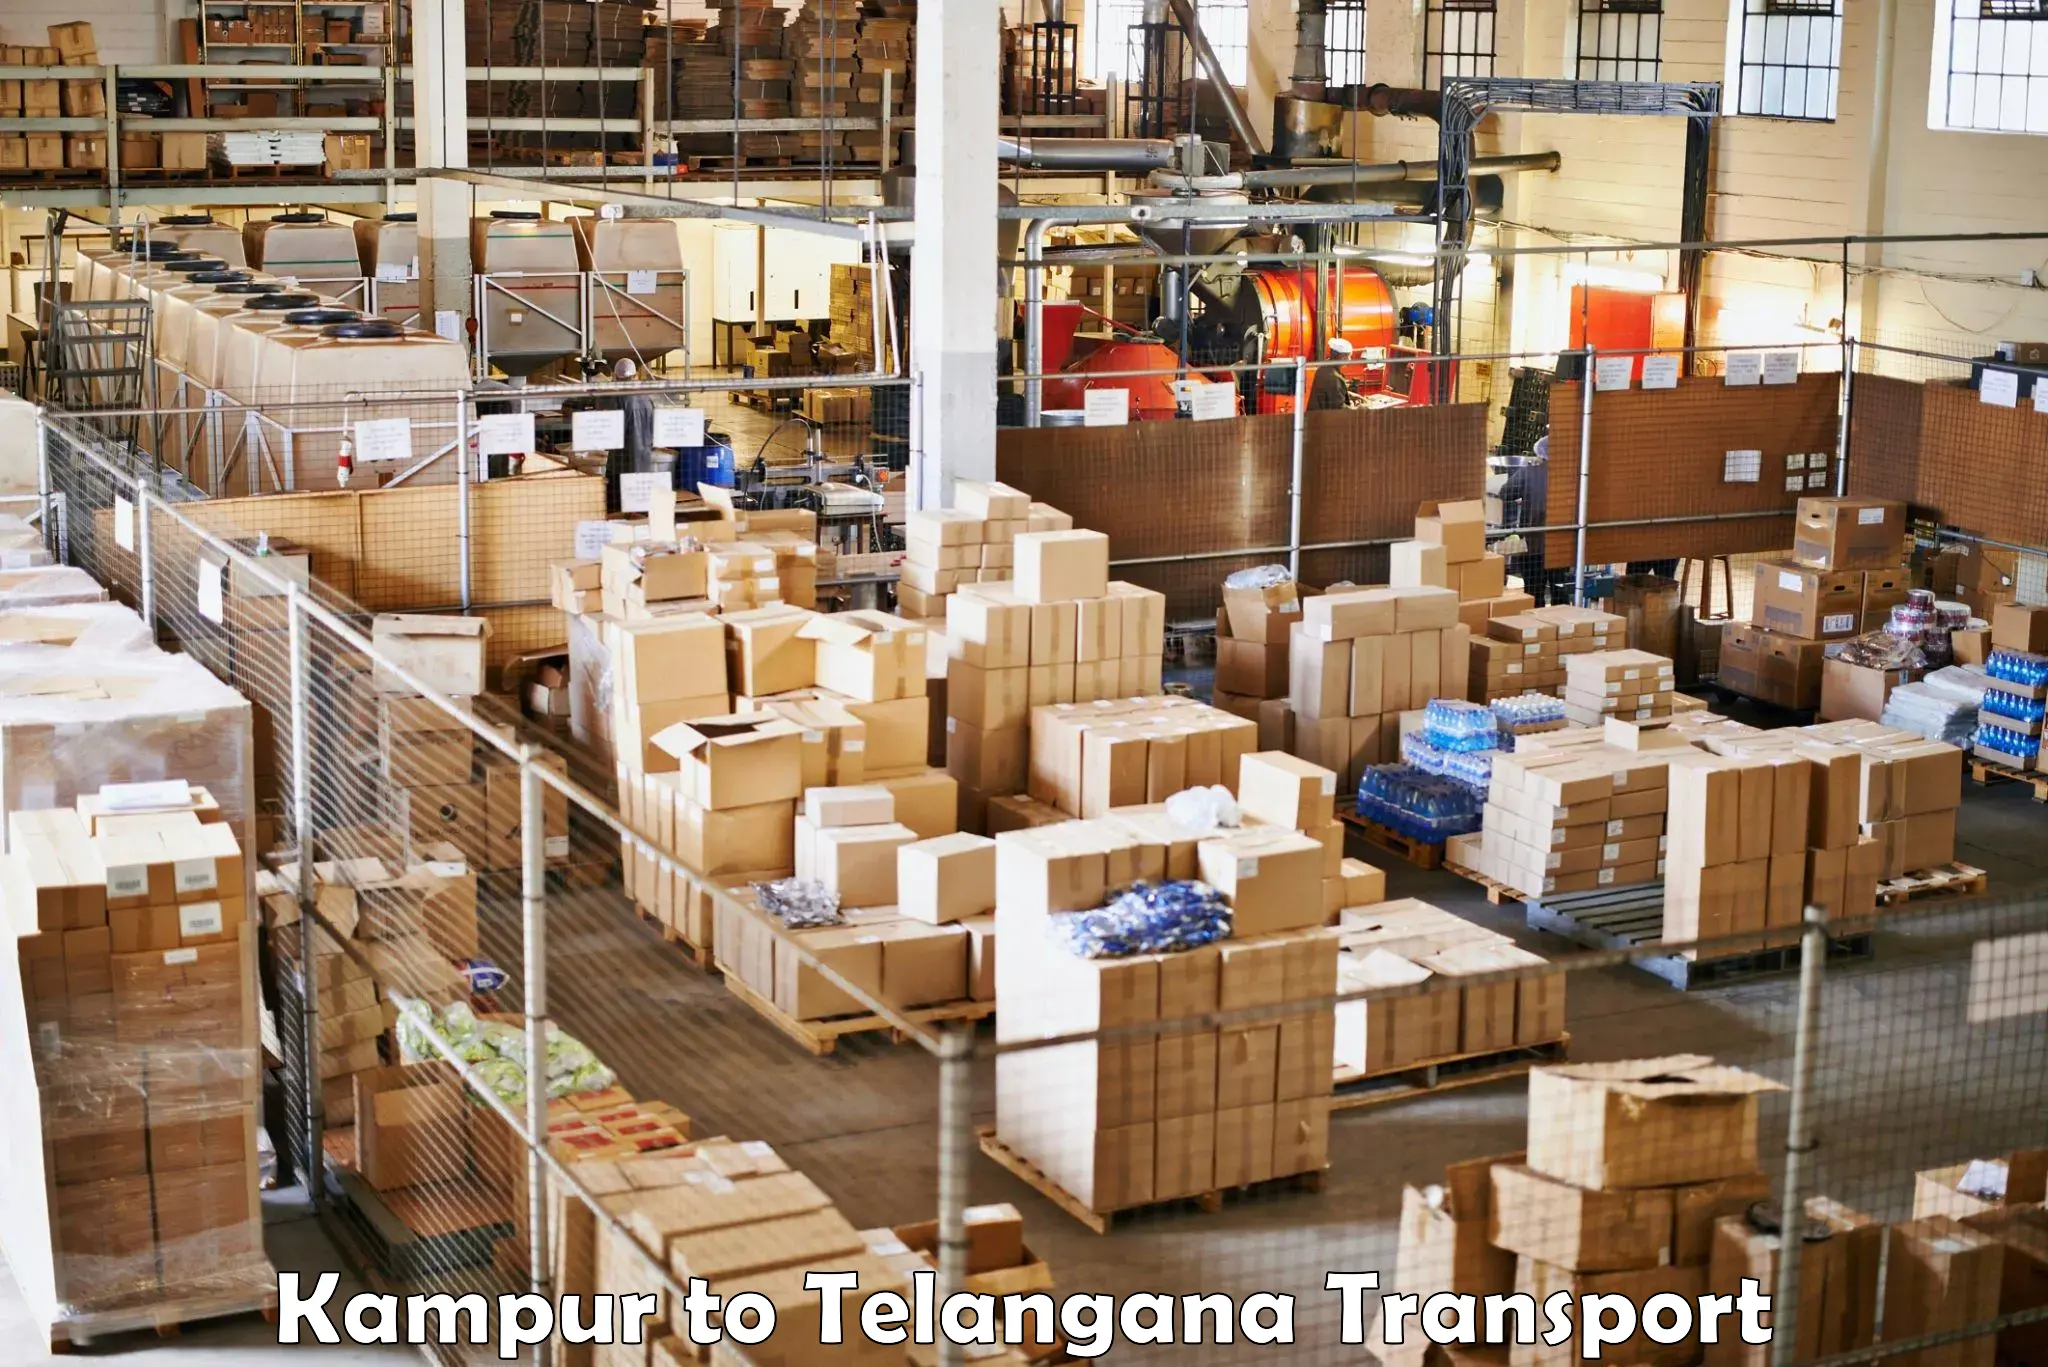 Truck transport companies in India Kampur to Tadvai